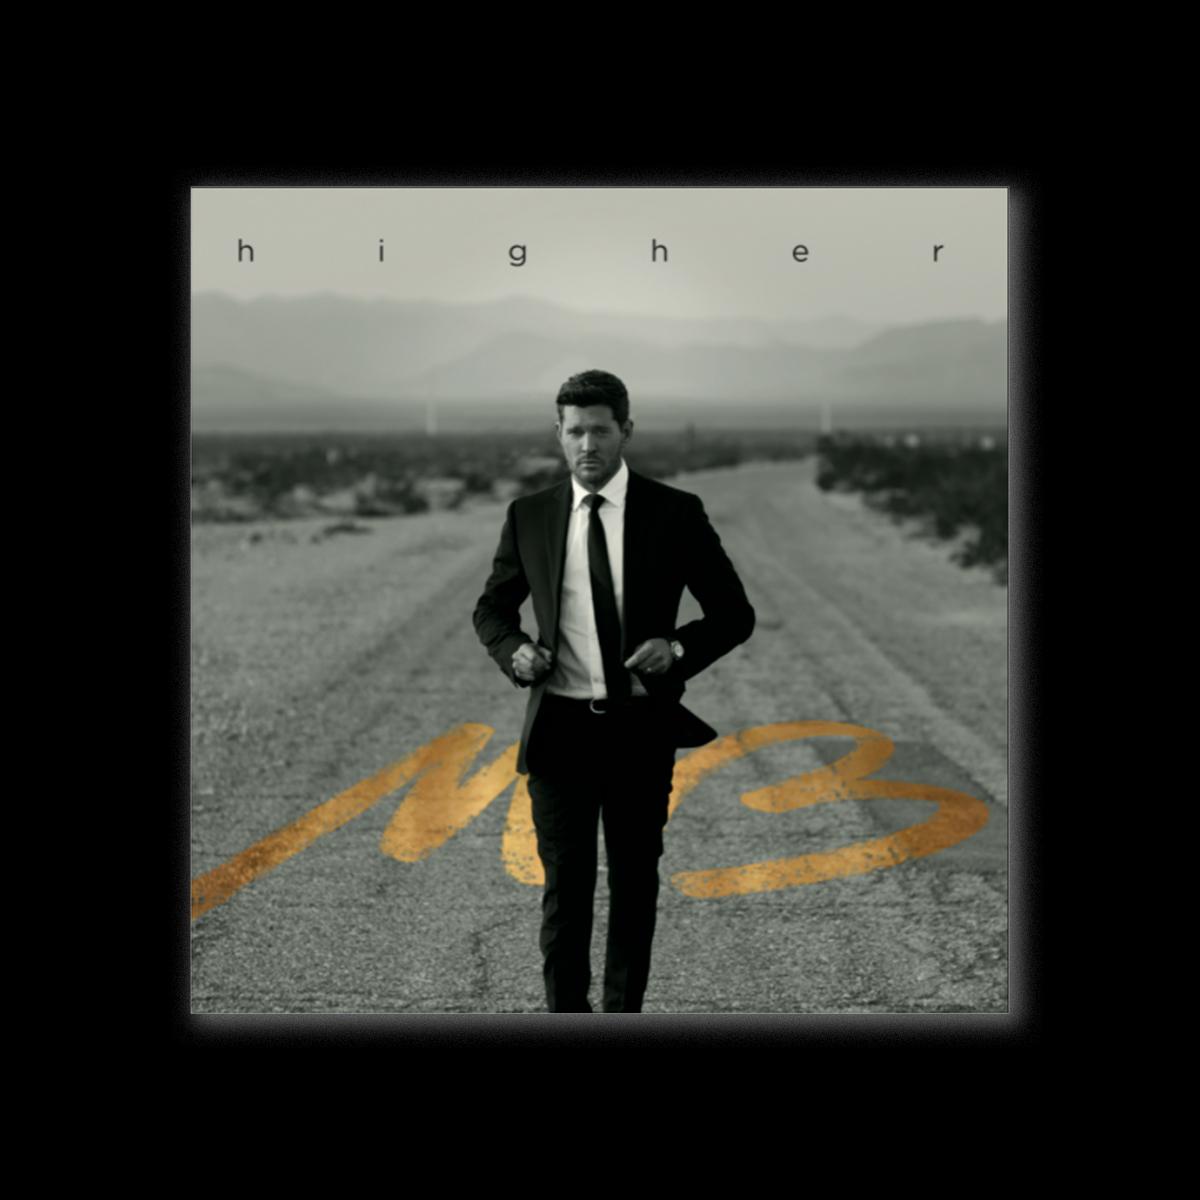 Michael Bublé Announces Release Of New Album Higher On March 25.